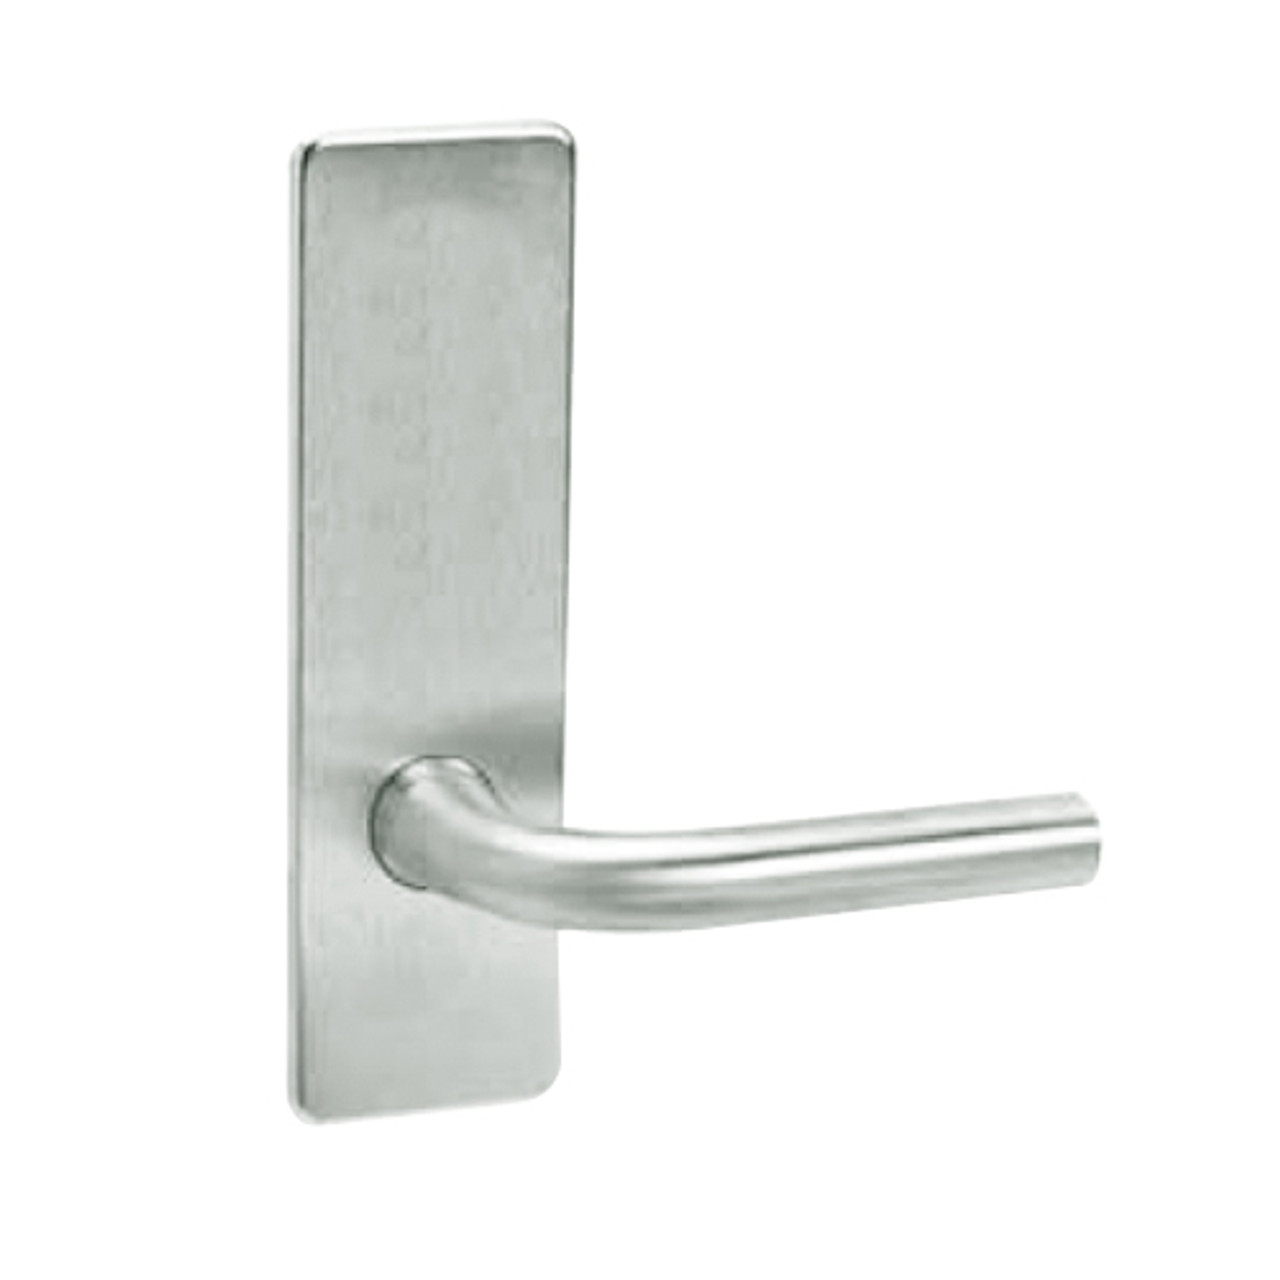 ML2051-RWN-618-CL6 Corbin Russwin ML2000 Series IC 6-Pin Less Core Mortise Office Locksets with Regis Lever in Bright Nickel